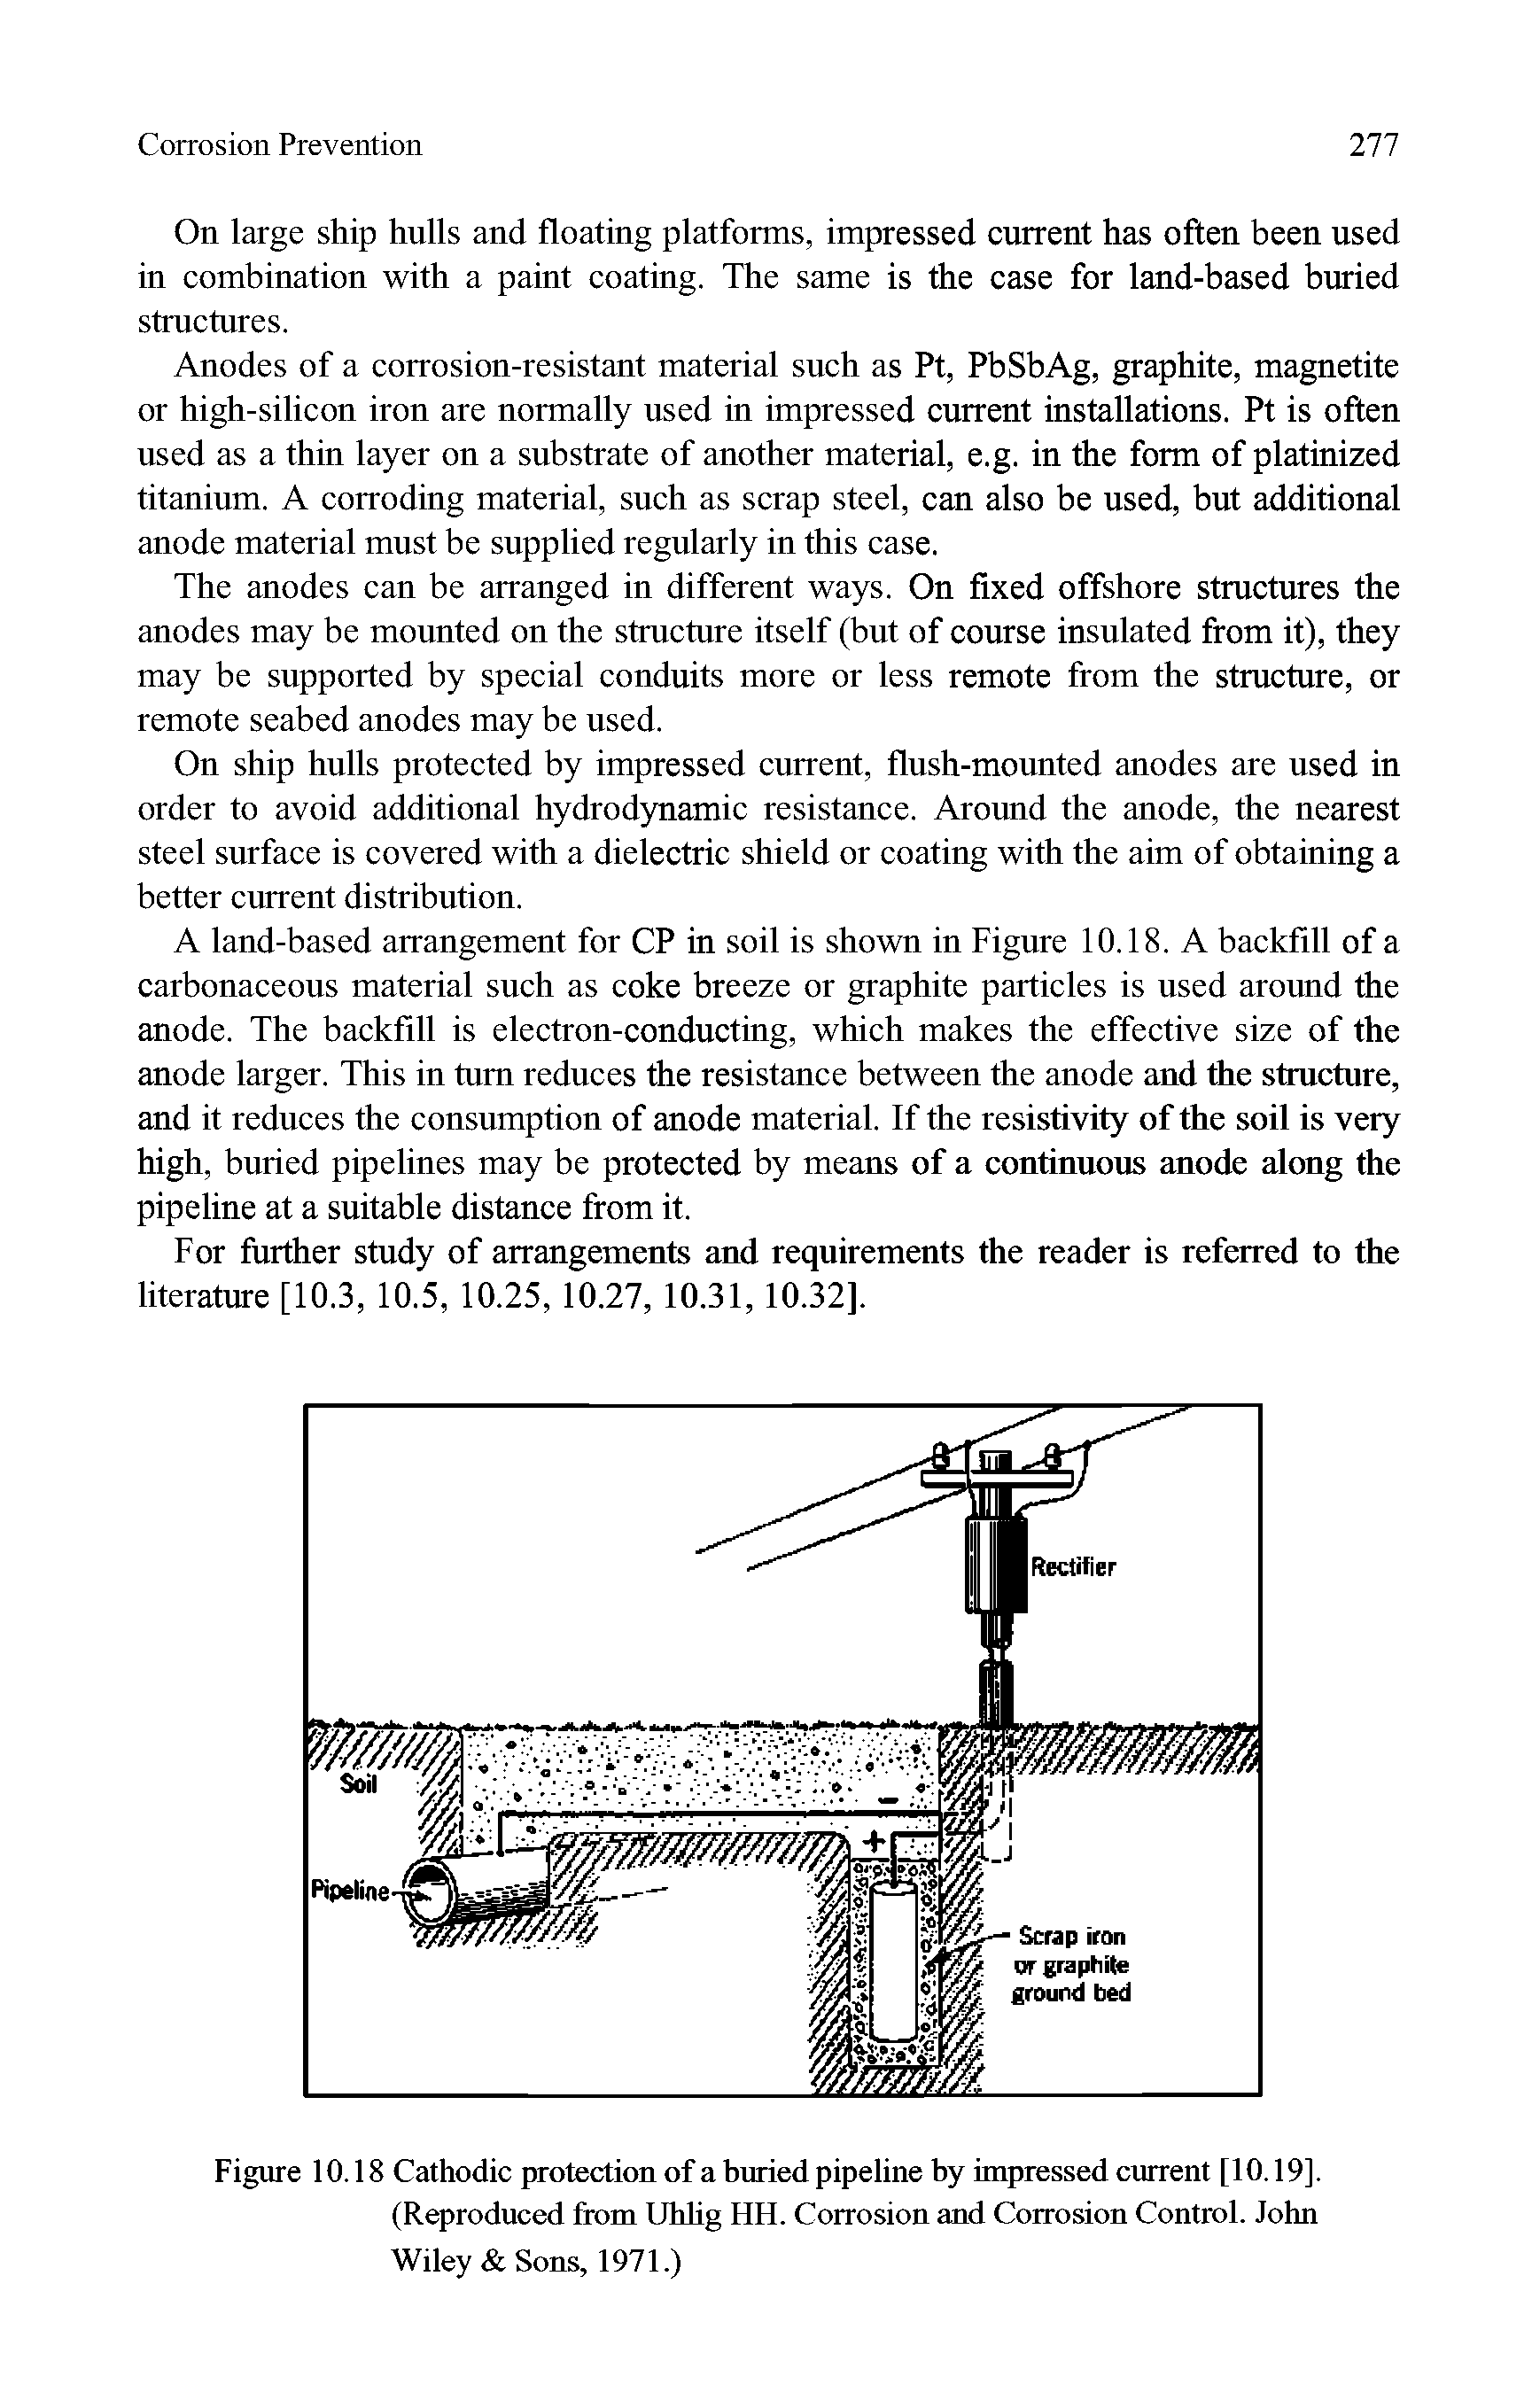 Figure 10.18 Cathodic protection of a buried pipeline by impressed current [10.19].